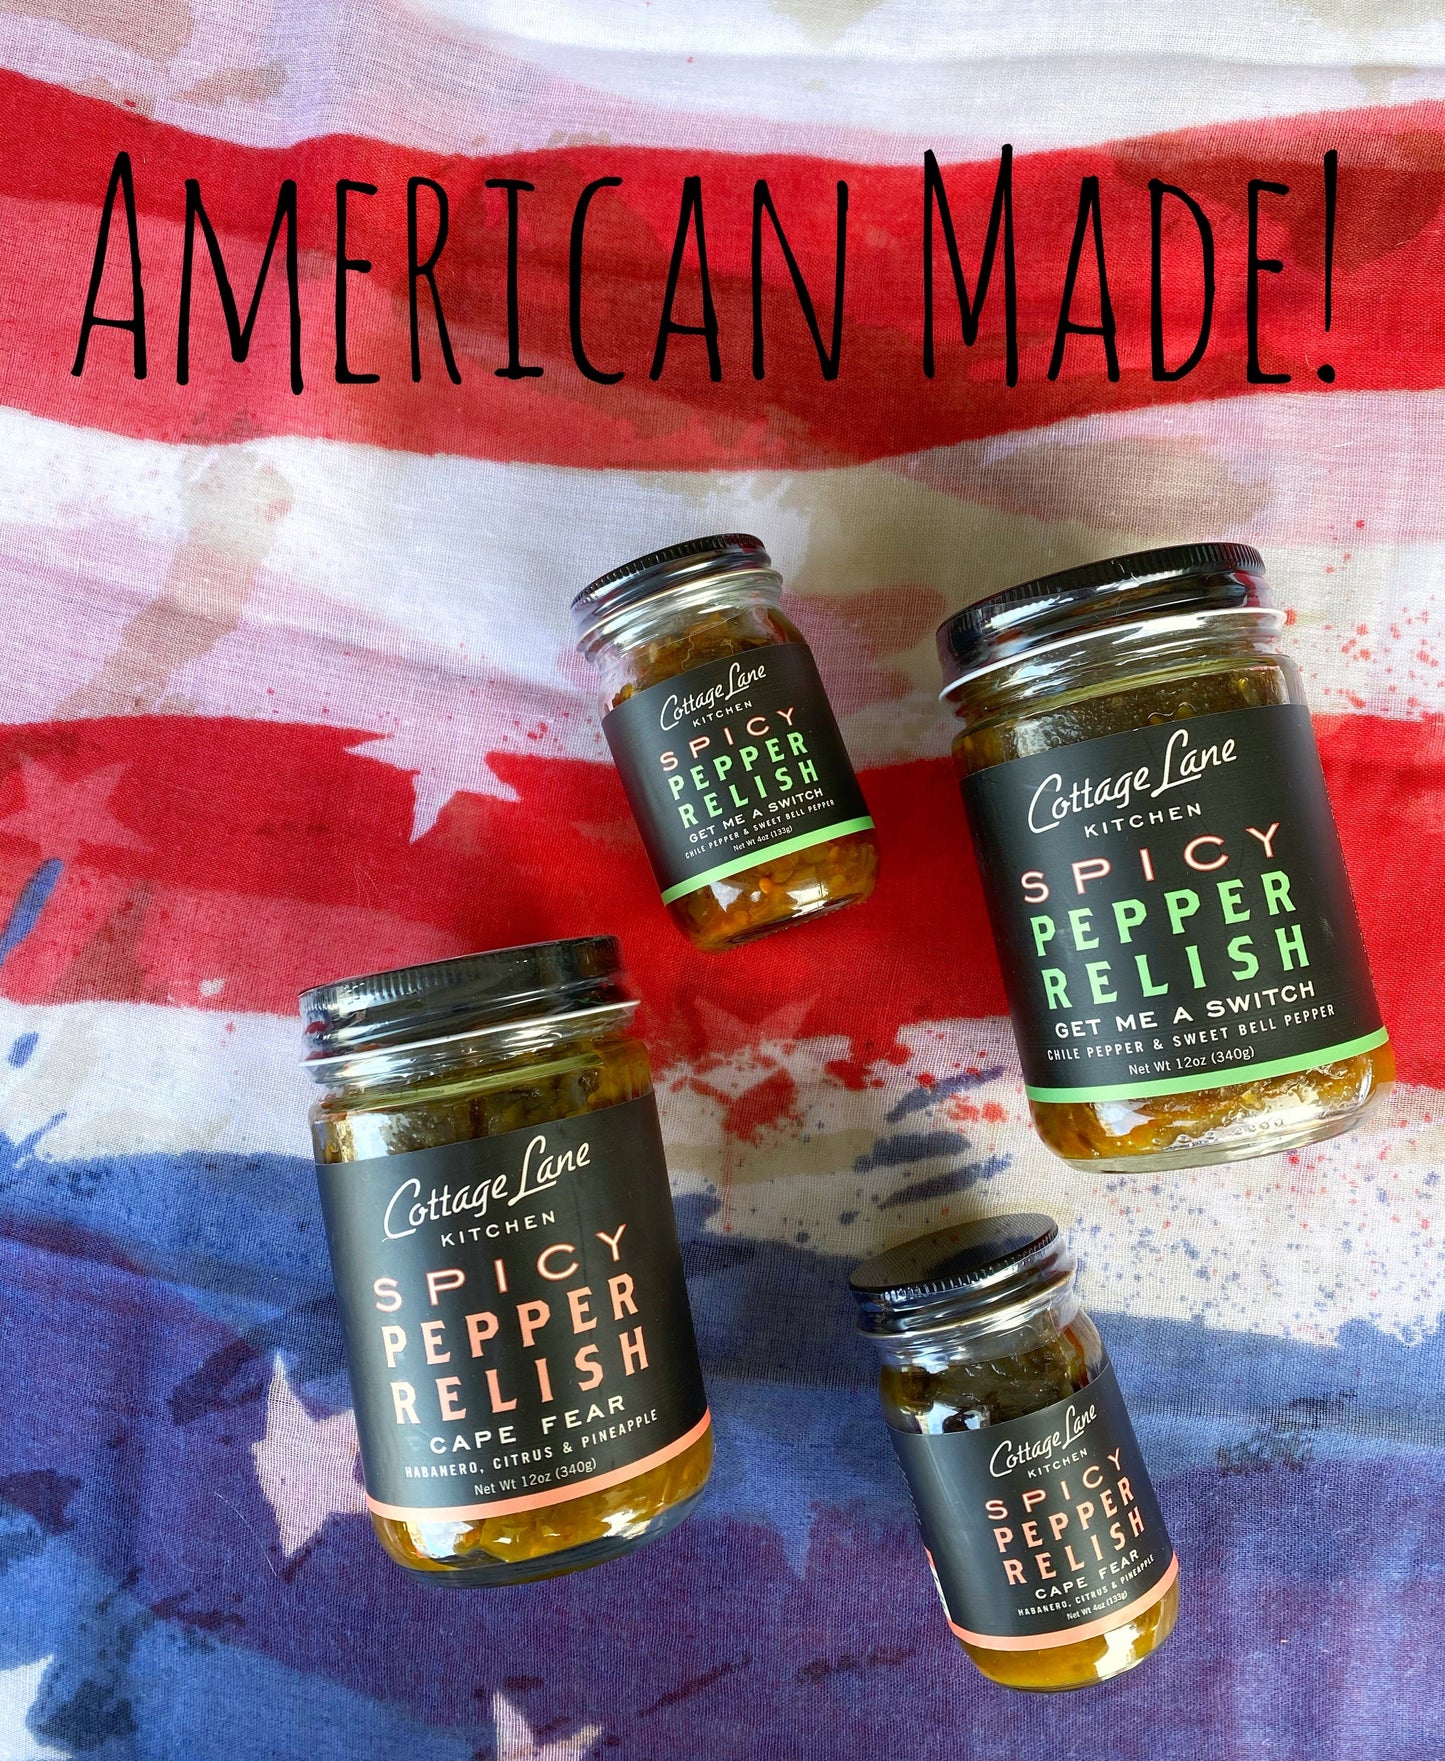 American made spicy pepper relish by cottage lane kitchen